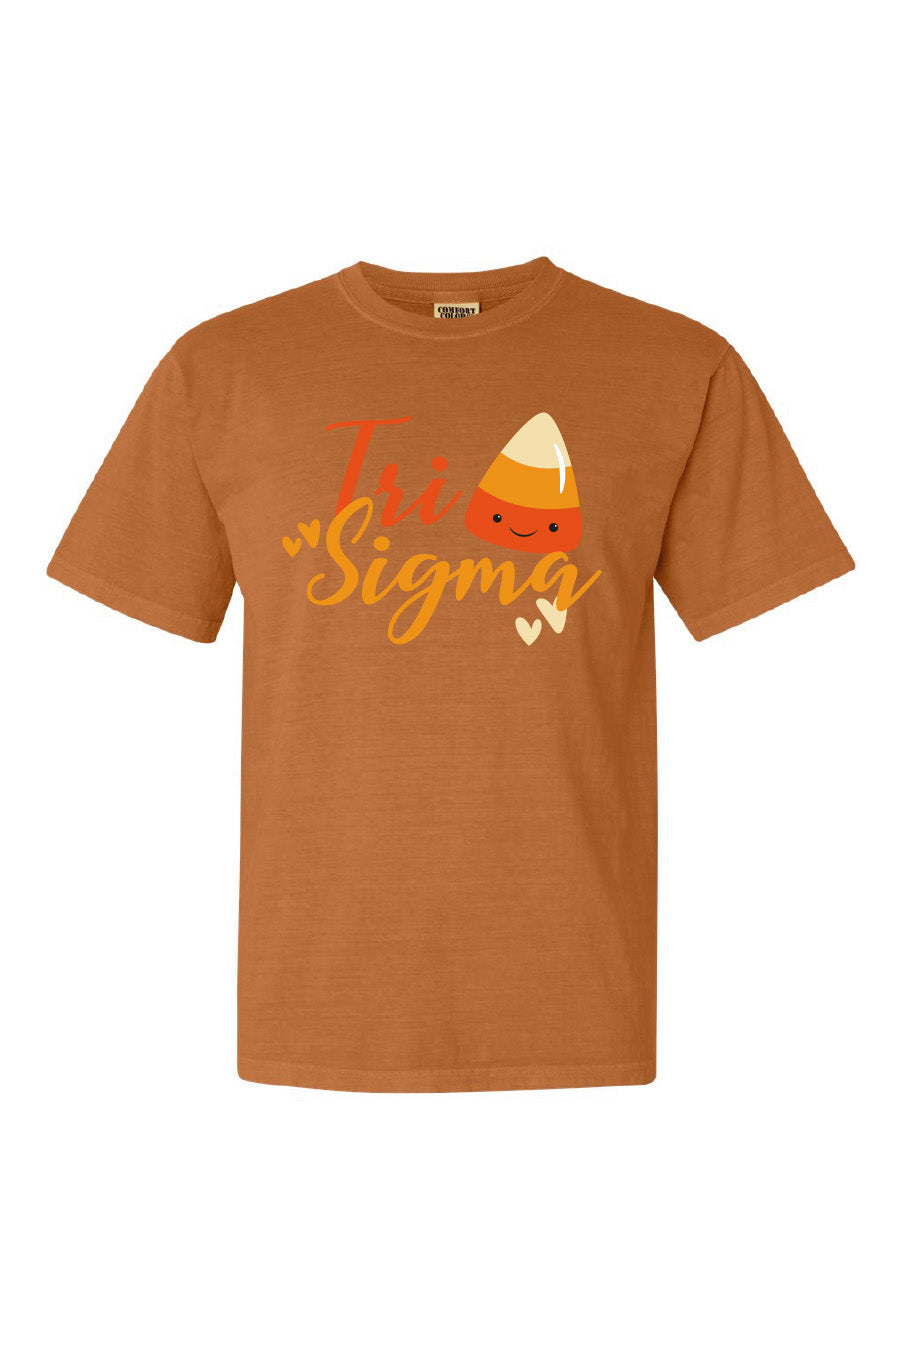 Load image into Gallery viewer, Candy Corn Tee
